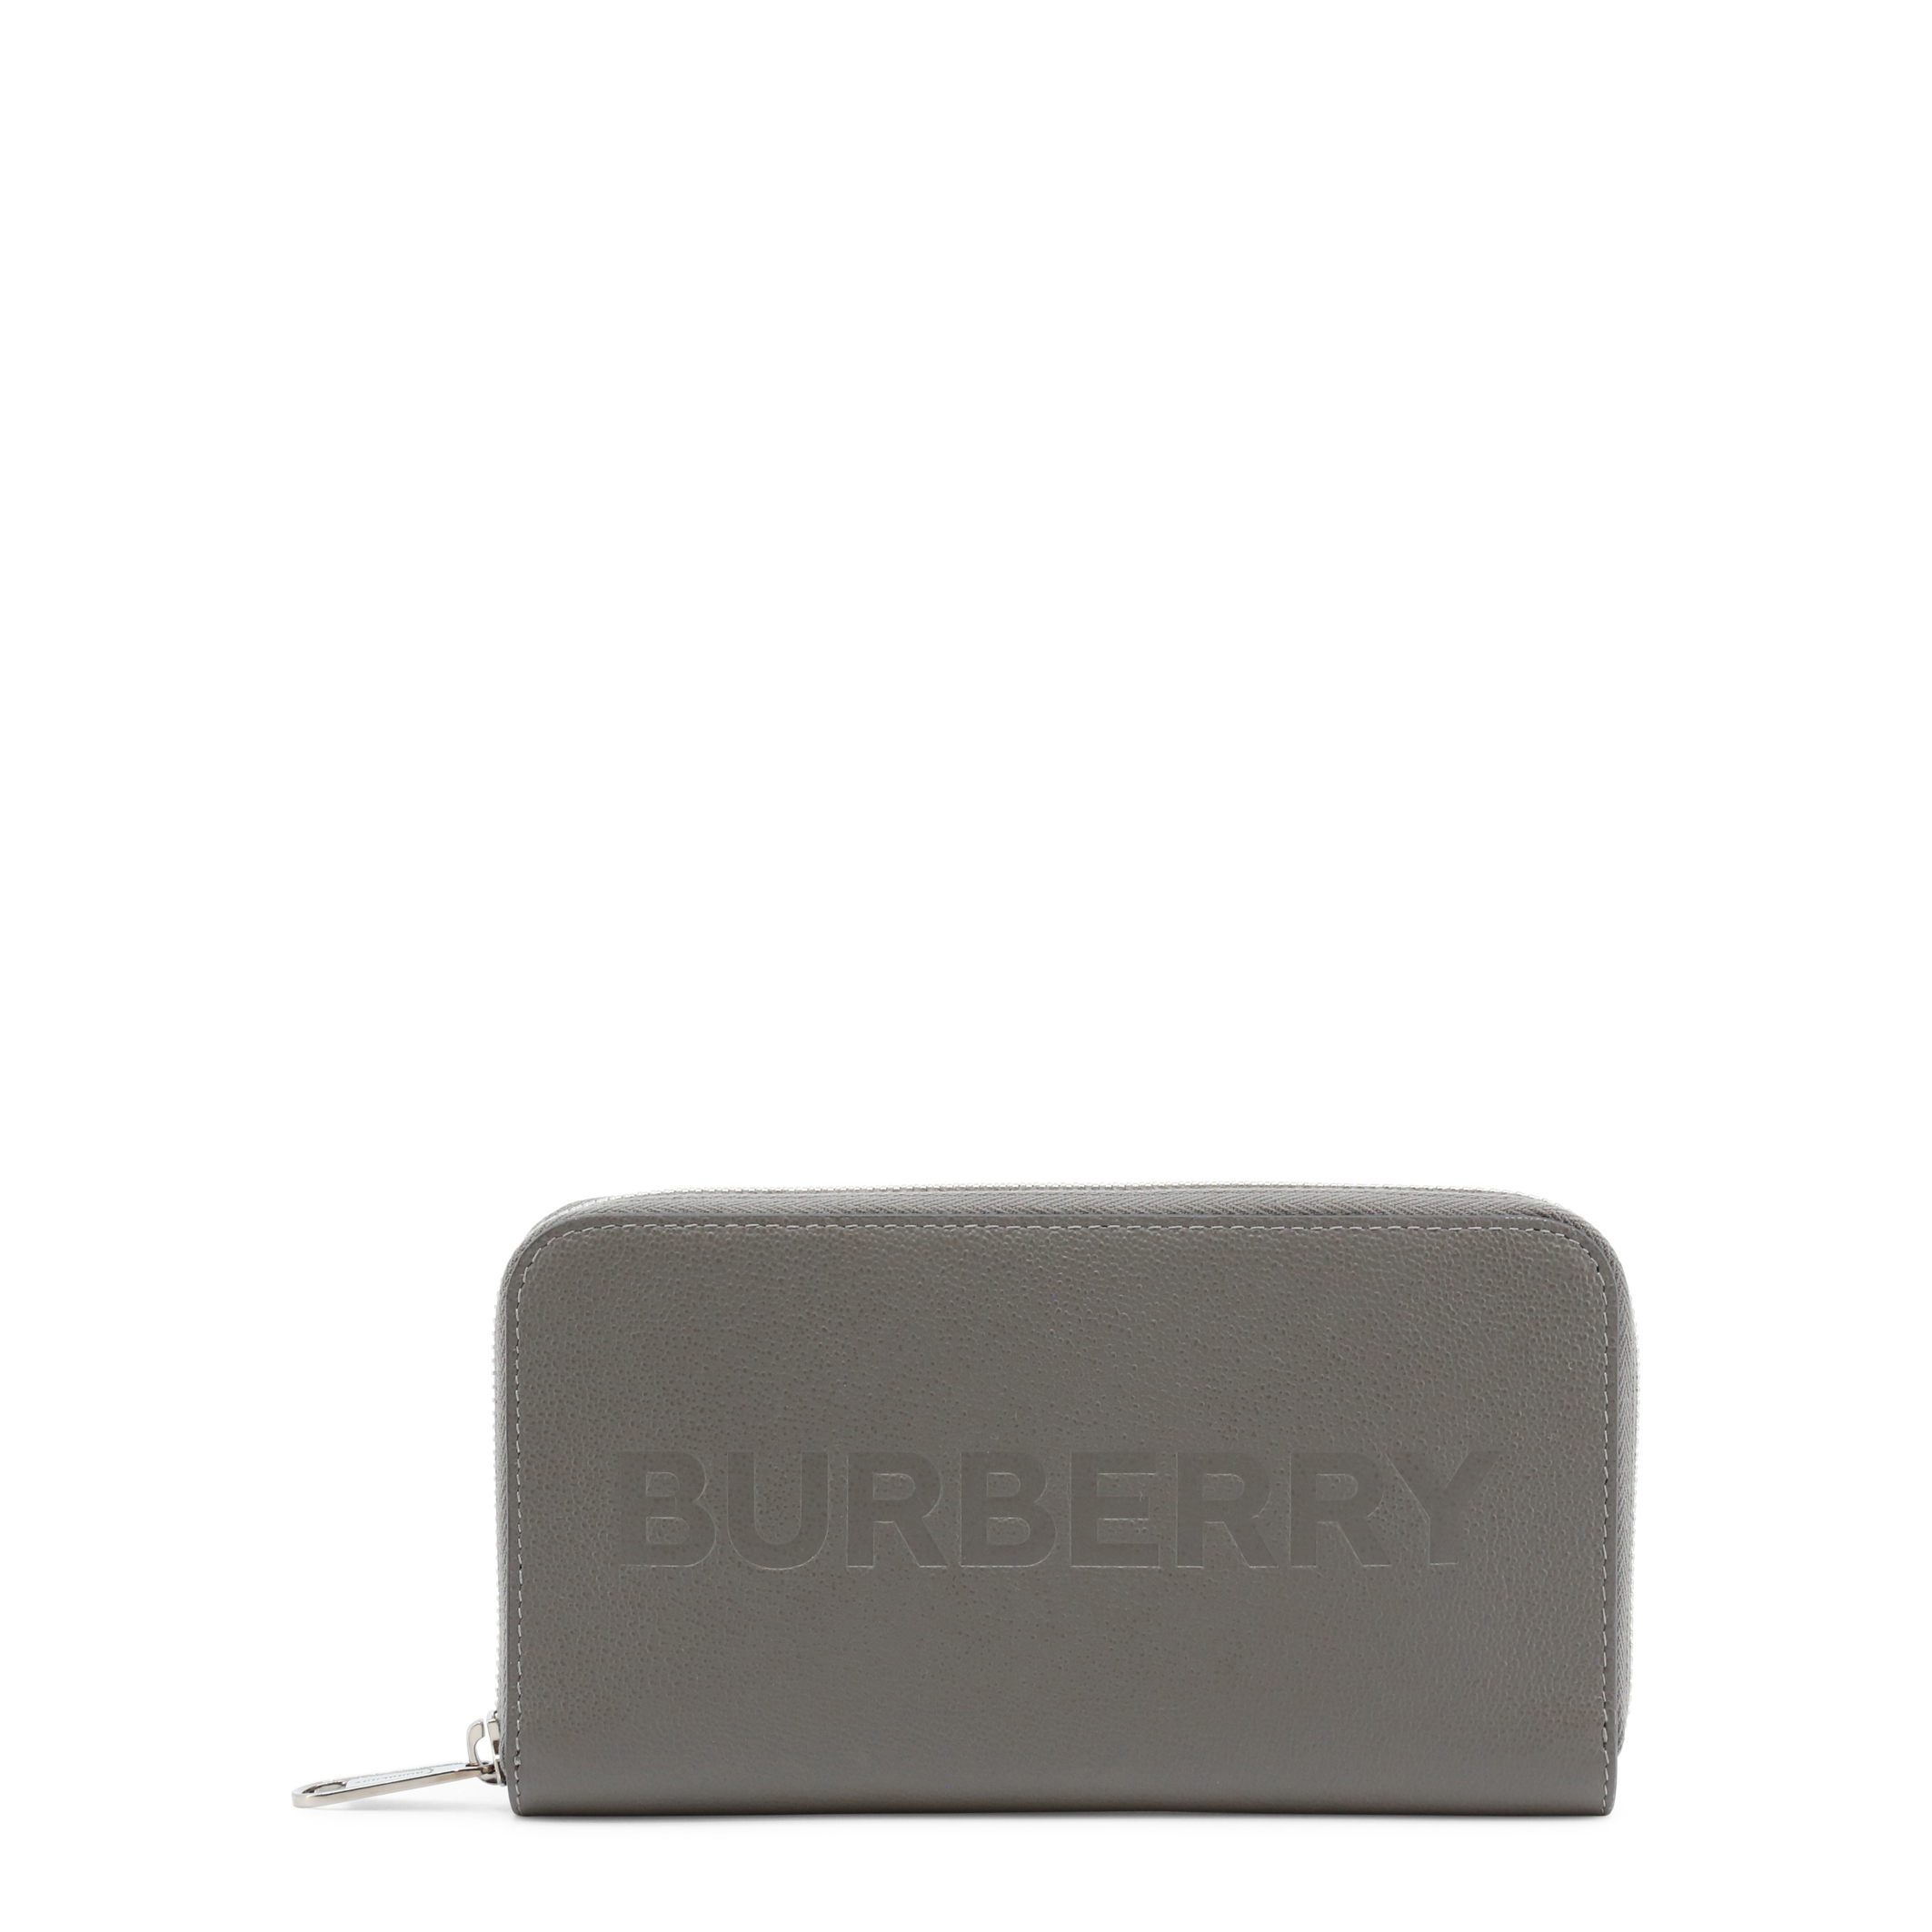 Burberry - Portefeuille 805288